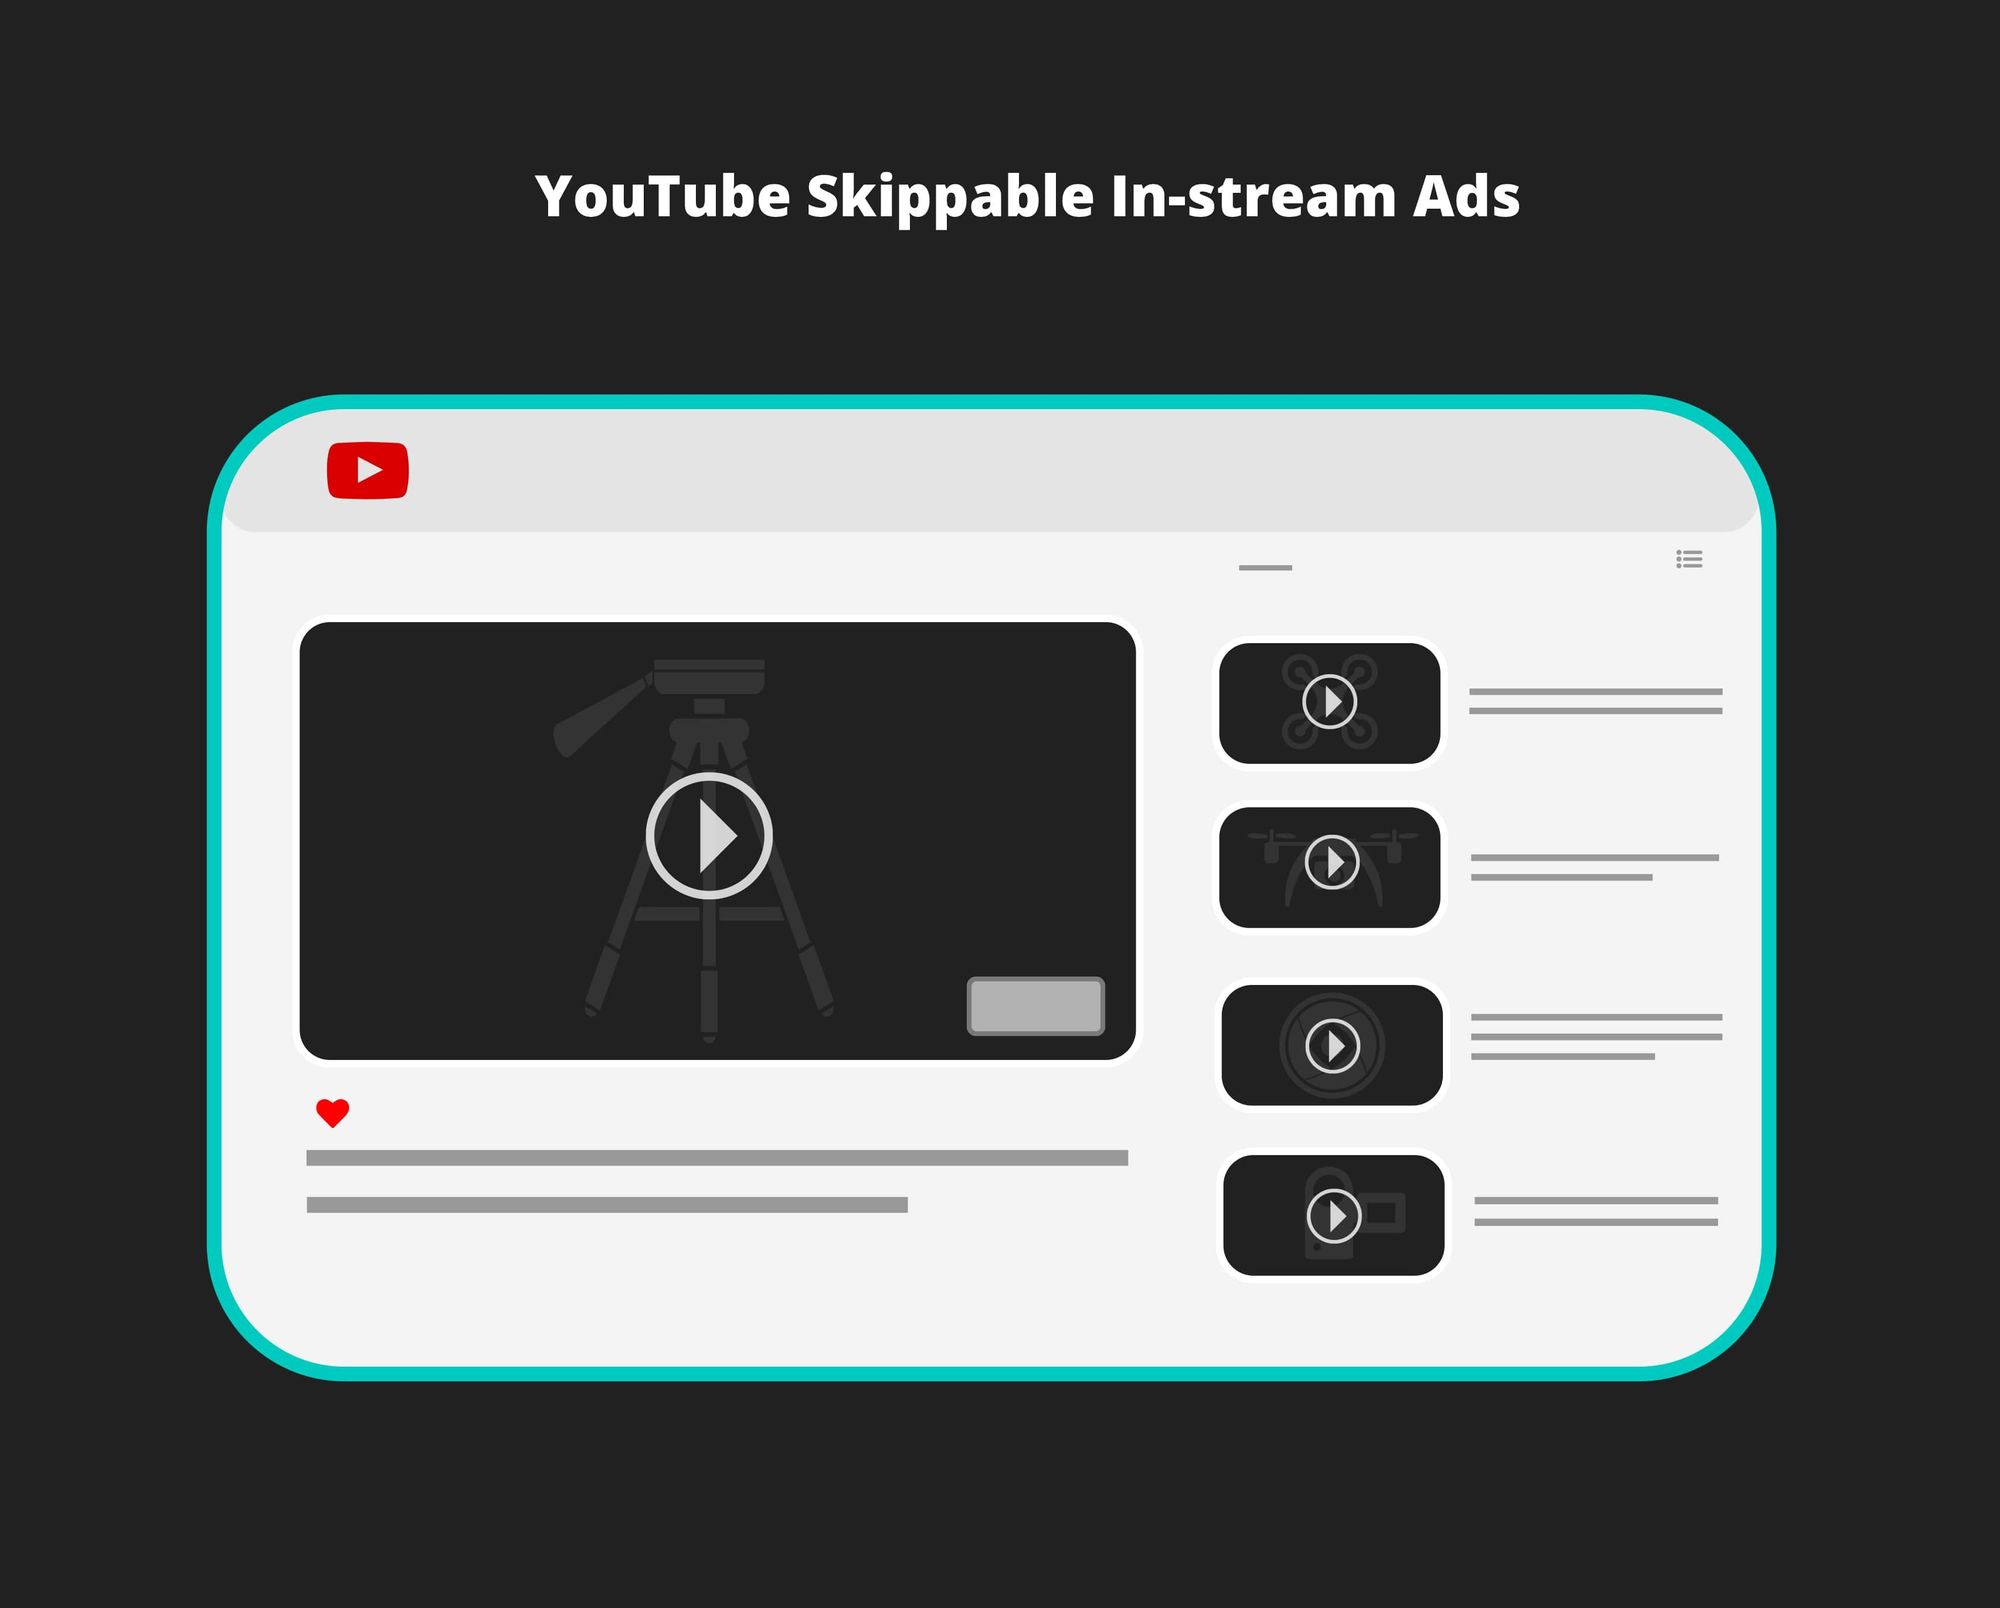 what is YouTube skippable in-stream ads